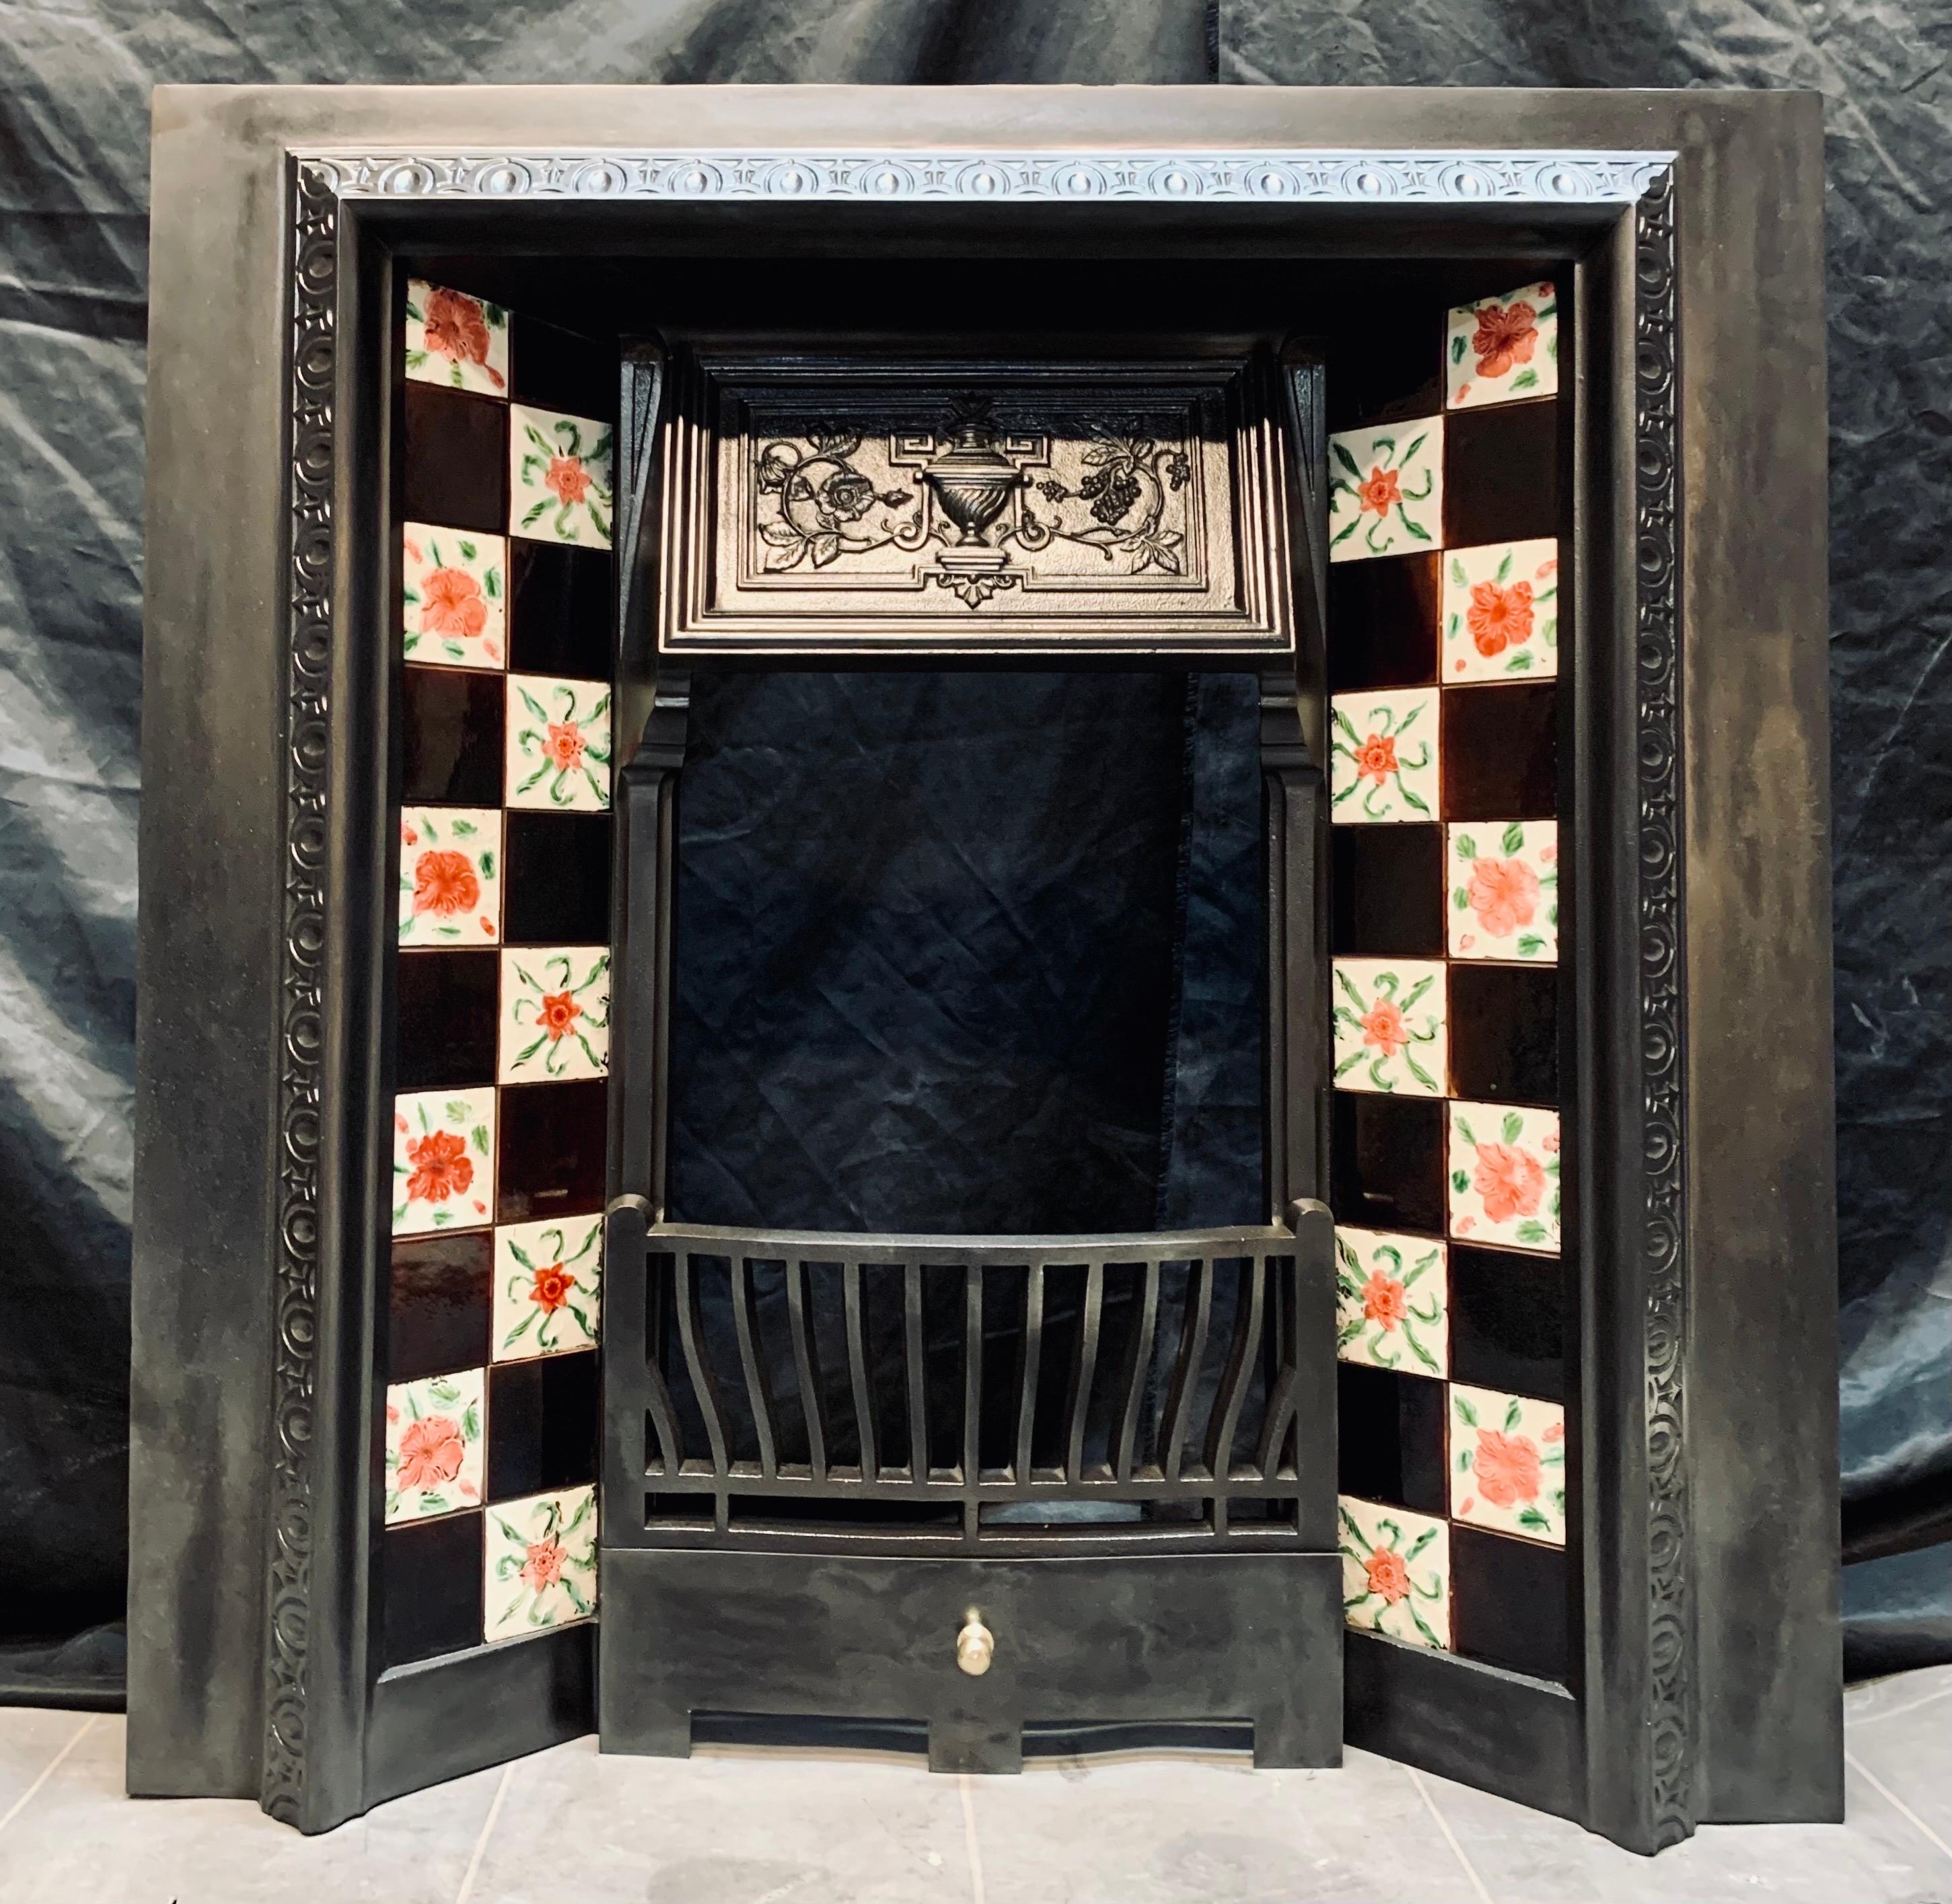 A Scottish 19th Century Victorian cast iron fireplace insert with hand painted original tiles. A cast iron outer frame with a raised decorative border, a central hooded canopy with high relief detail flanked by a pair of hand painted original tiles.